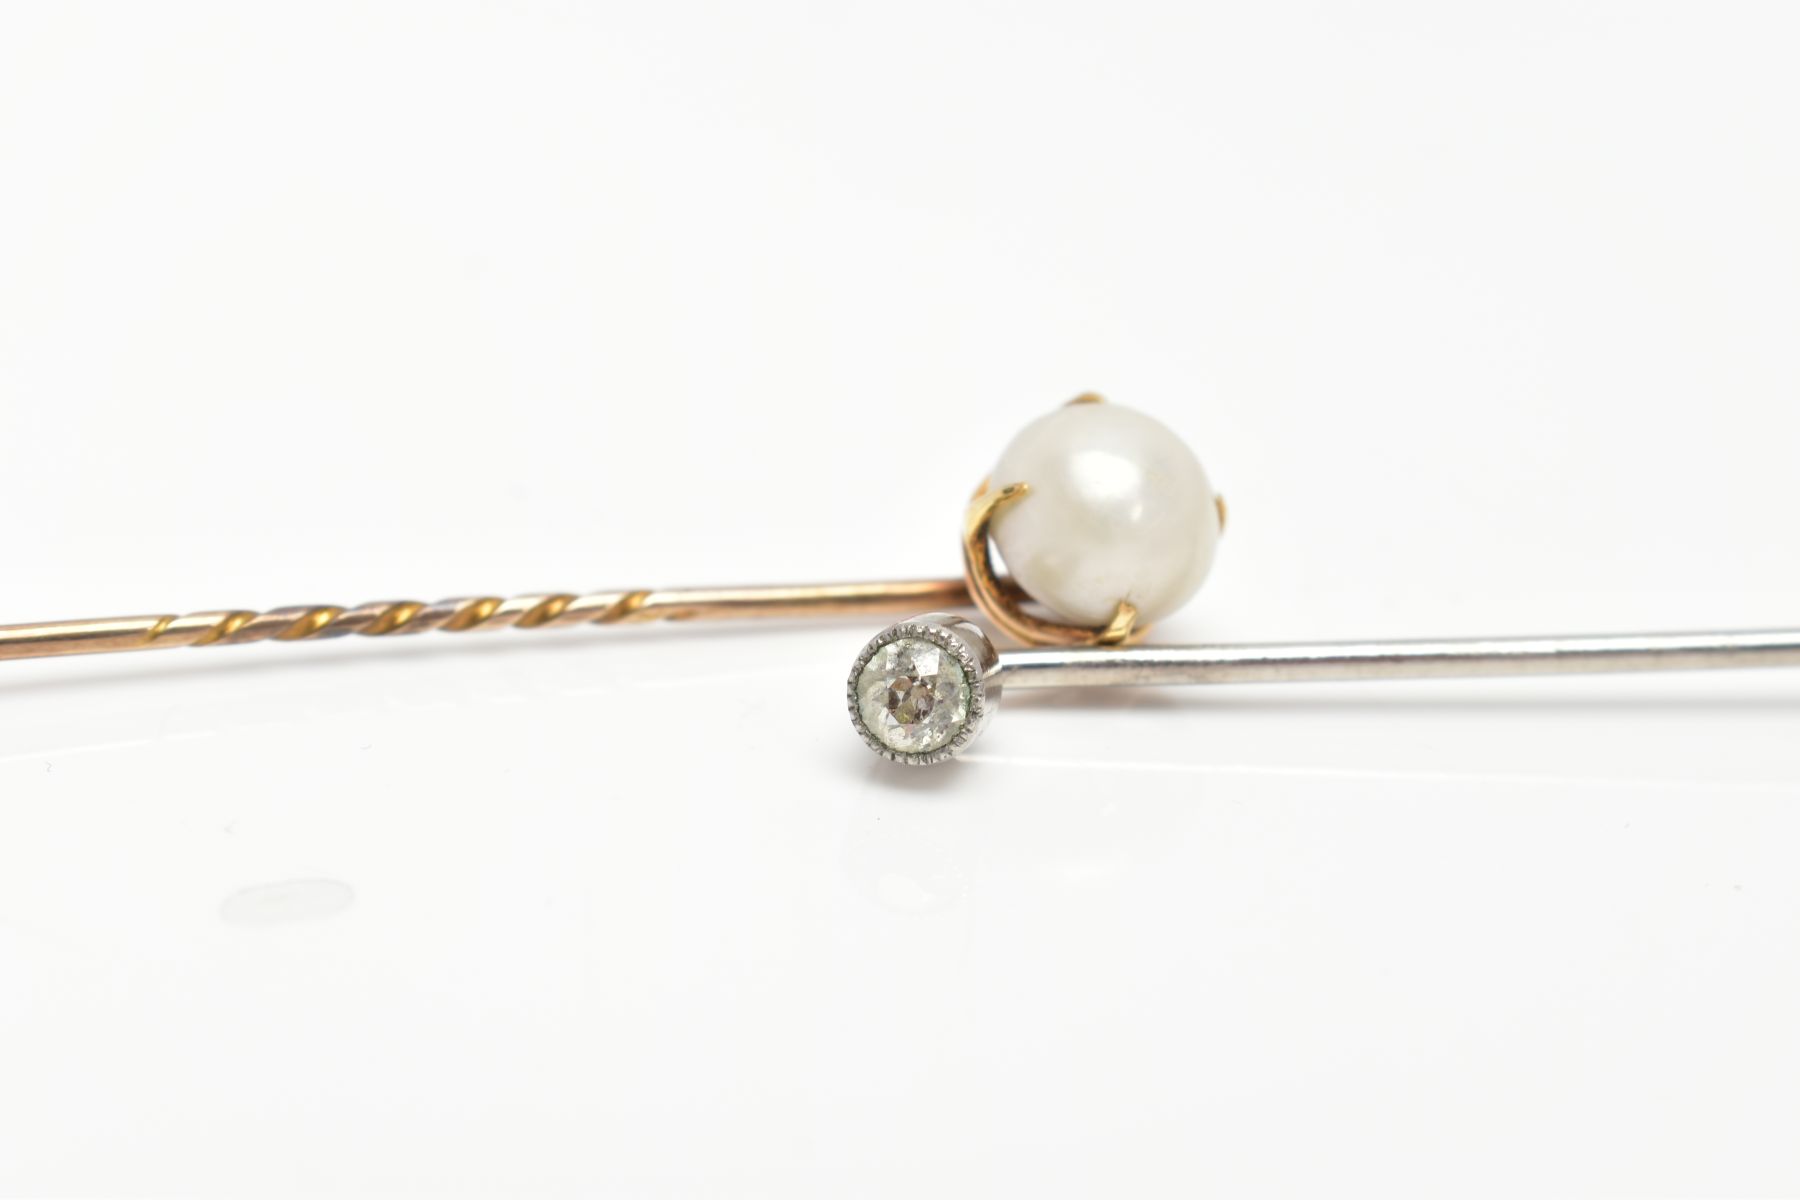 TWO EARLY 20TH CENTURY GEM SET STICK PINS, one white metal and diamond milgrain set stick pin, - Image 3 of 5